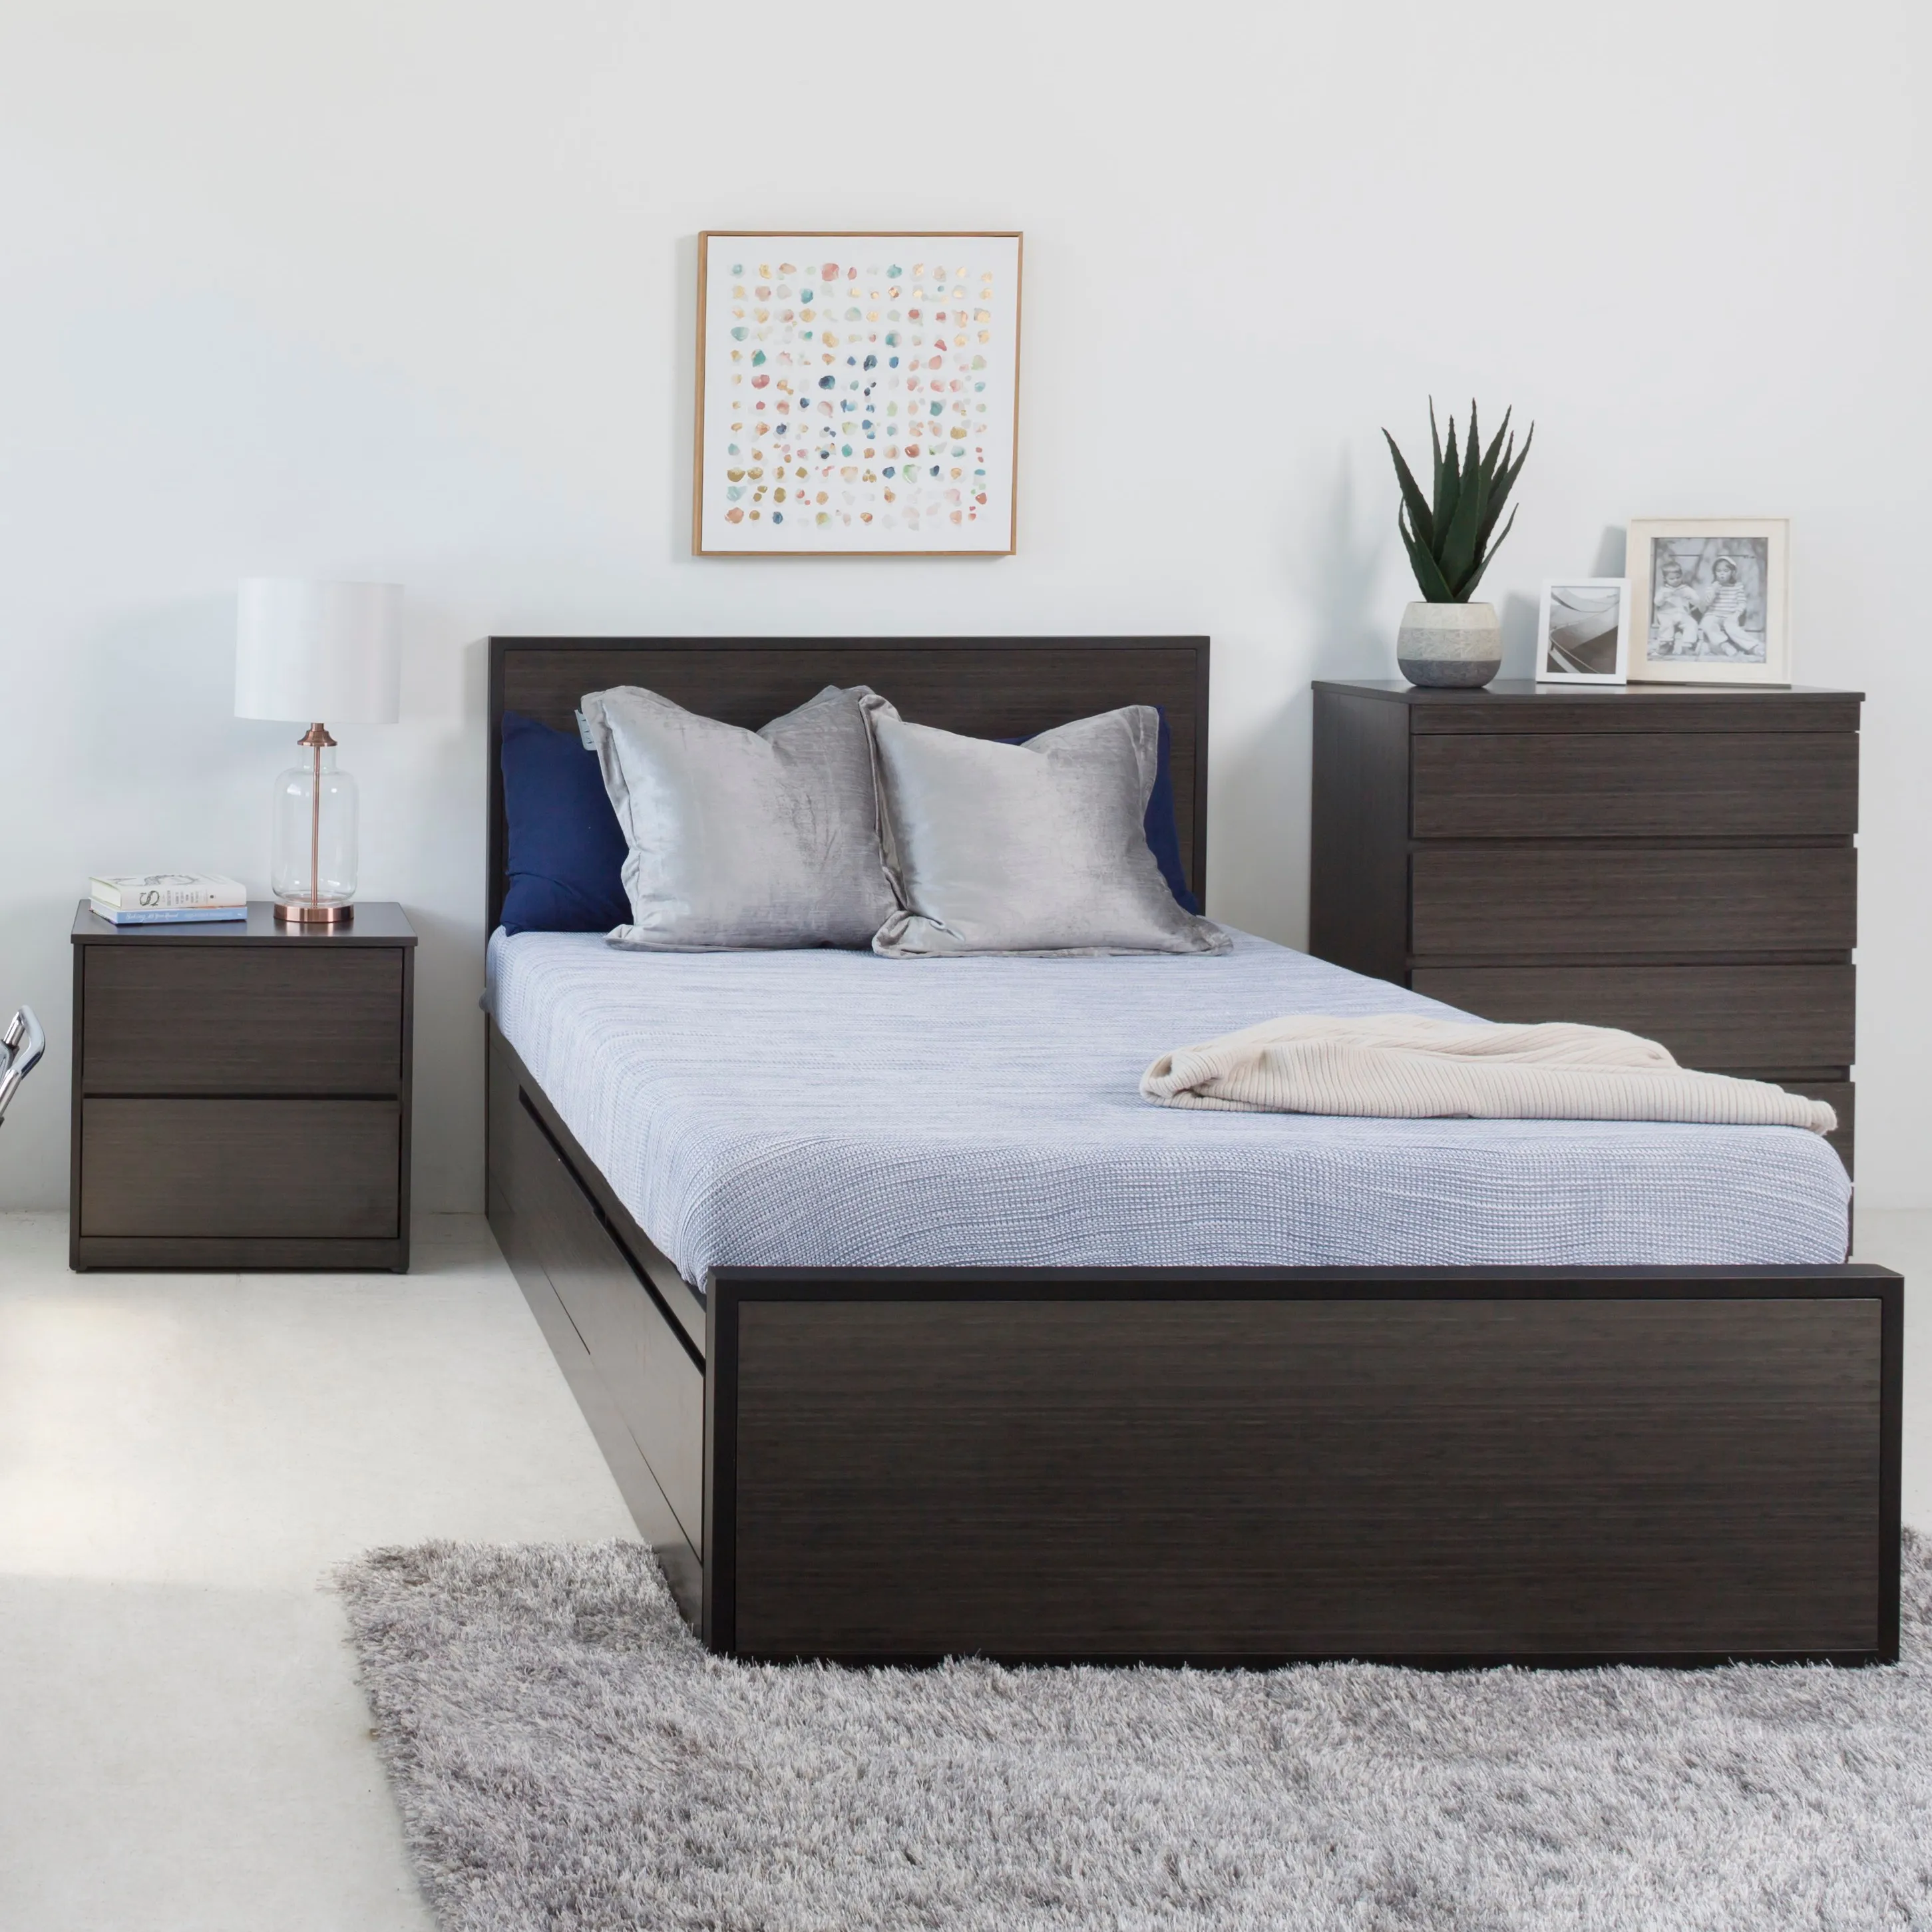 Supplier bedroom set wooden bed, cabinet, table, chair form wooden OEM manufacturer for sale from Ngoc Hoang Anh Supplier